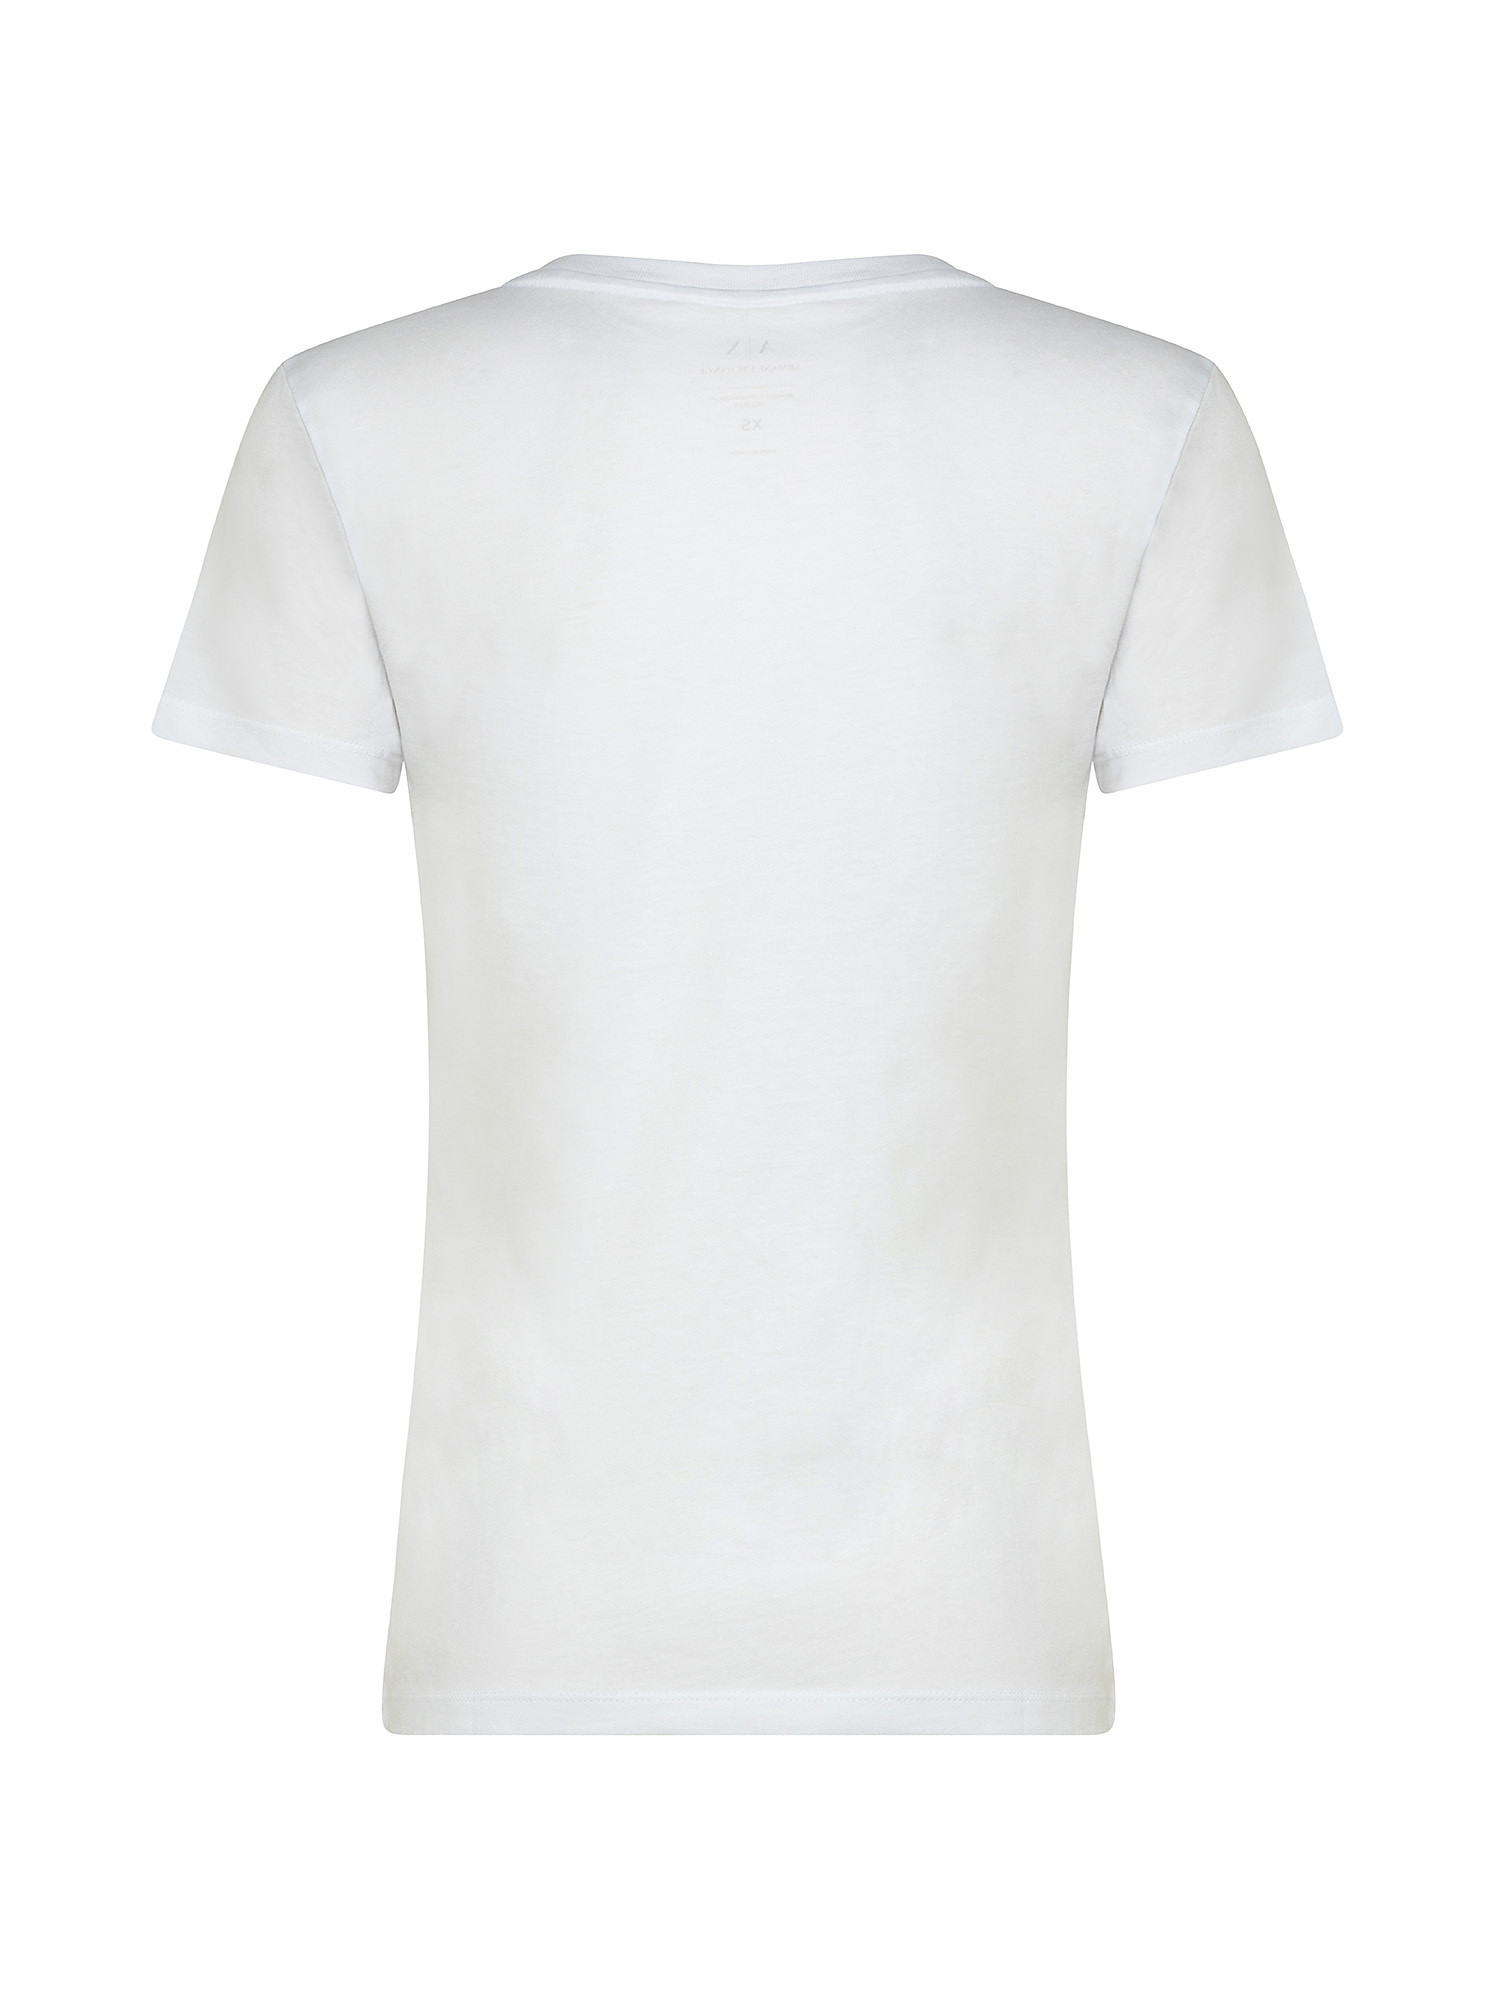 T-shirt with print, White, large image number 1